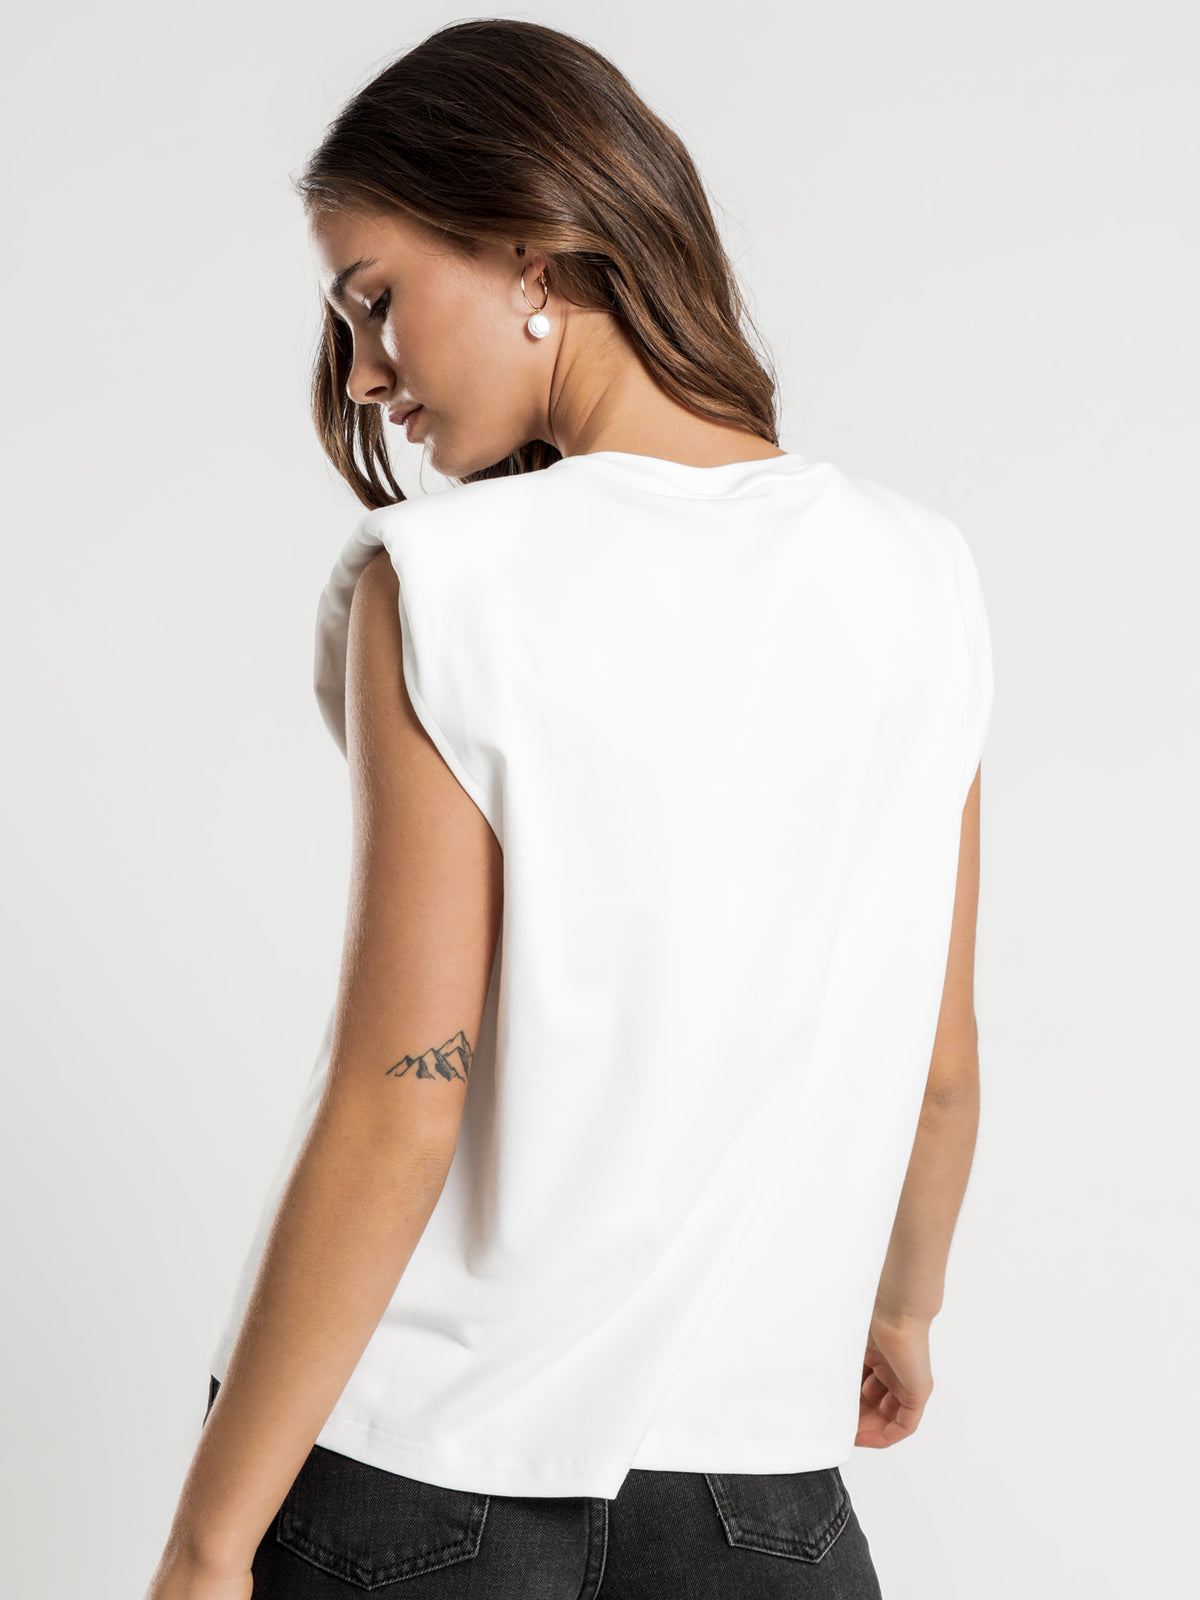 Venice T-Shirt in White